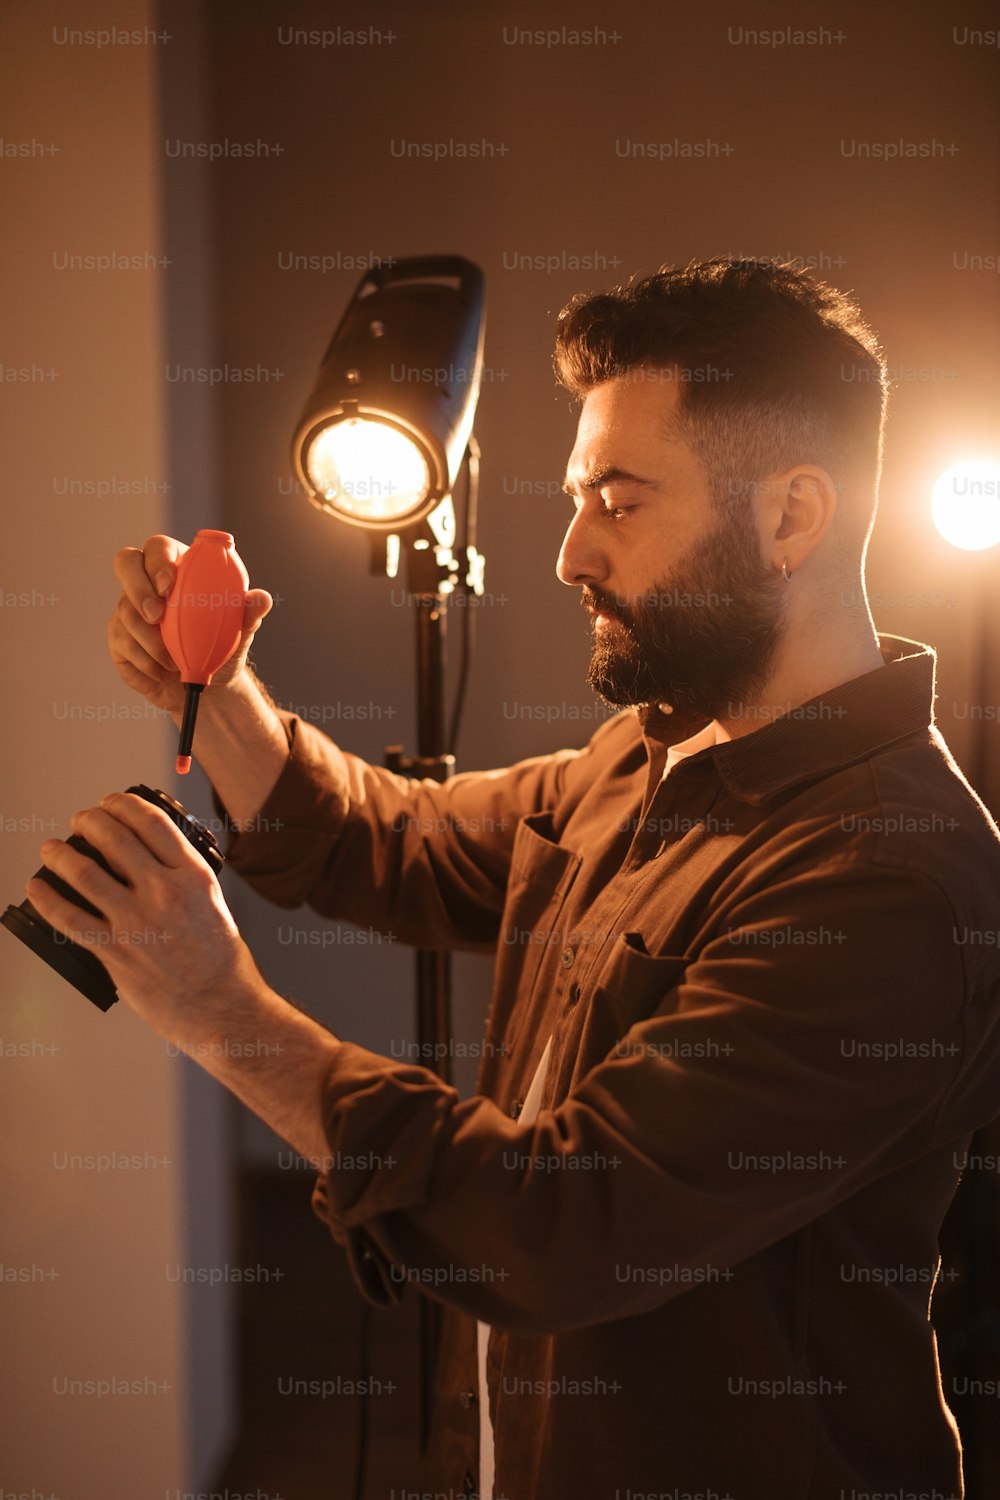 a man holding a red object in front of a light